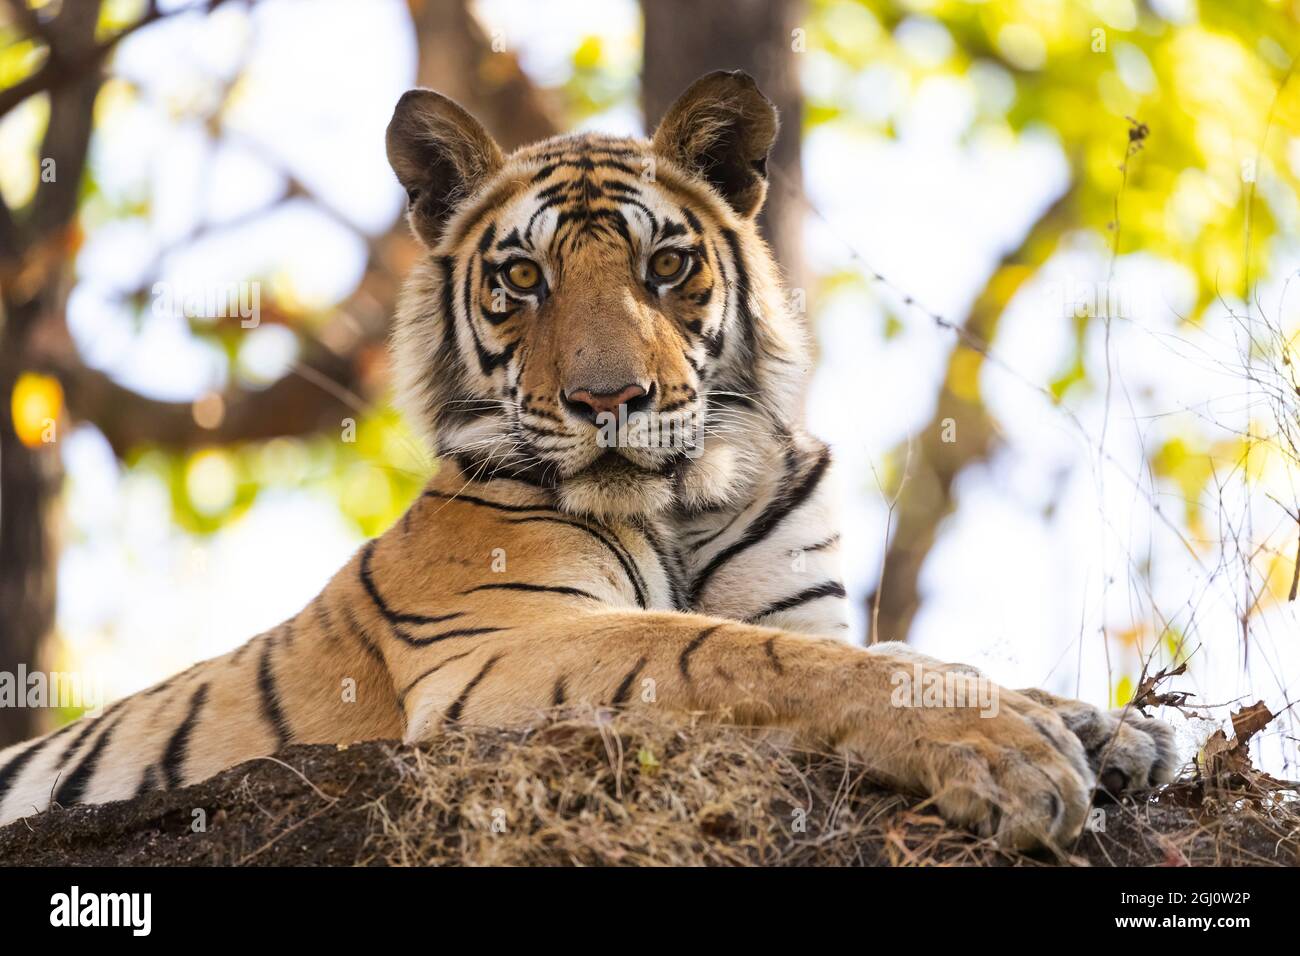 India, Madhya Pradesh, Bandhavgarh National Park. A young Bengal tiger watches from its perch high up on a rock. Stock Photo